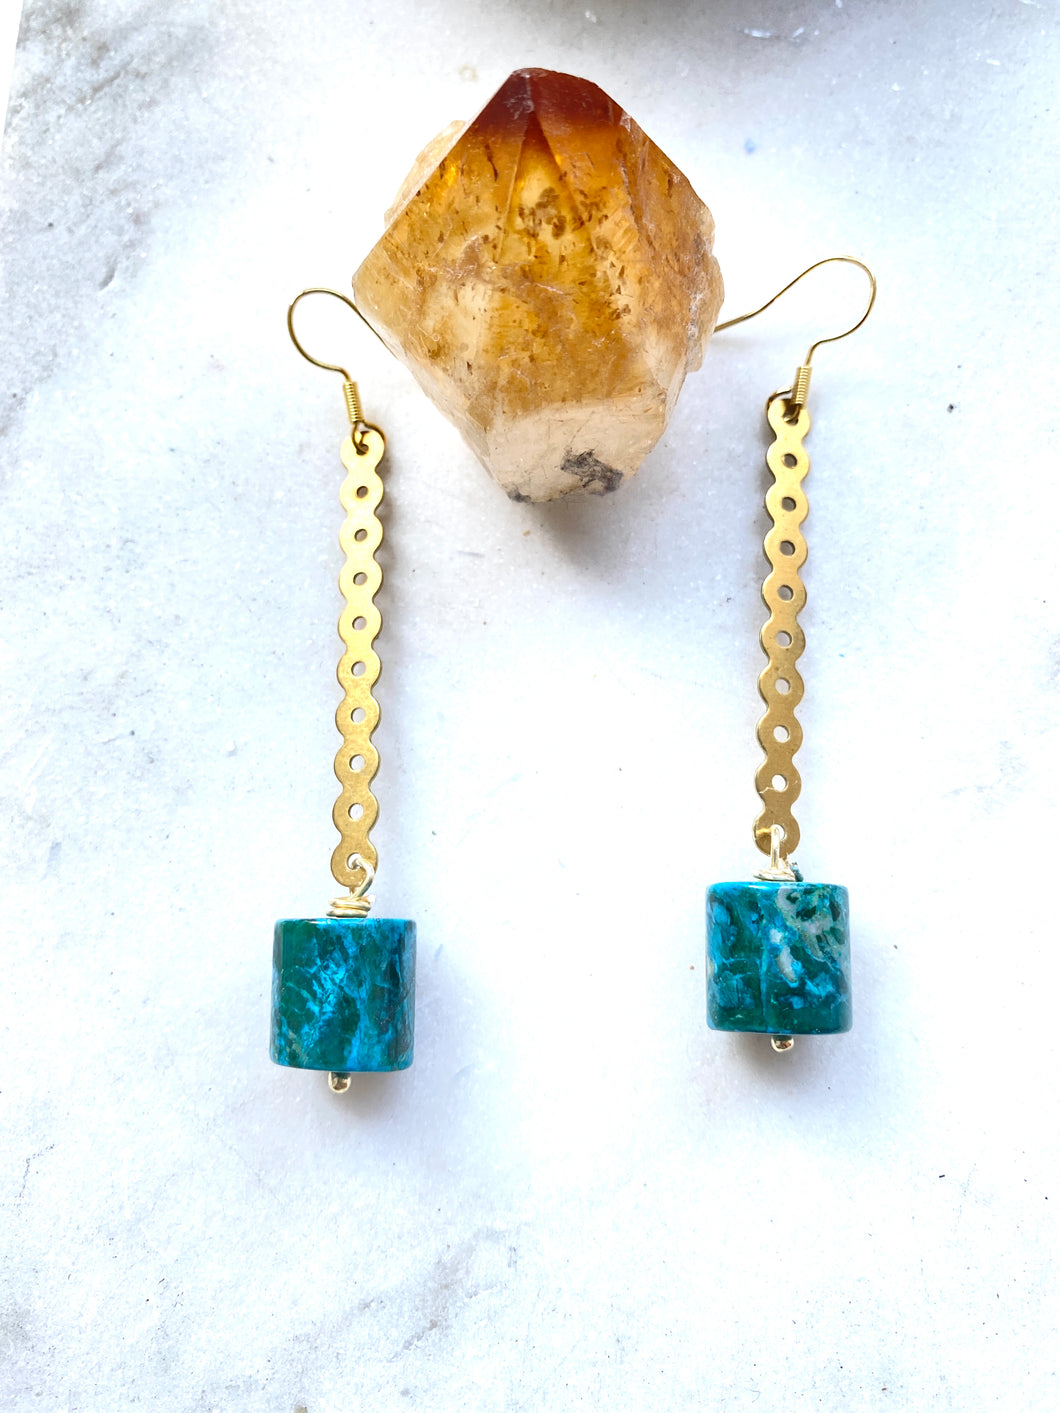 Chrysocolla Brass Earrings hand crafted by Full Moon Designs.